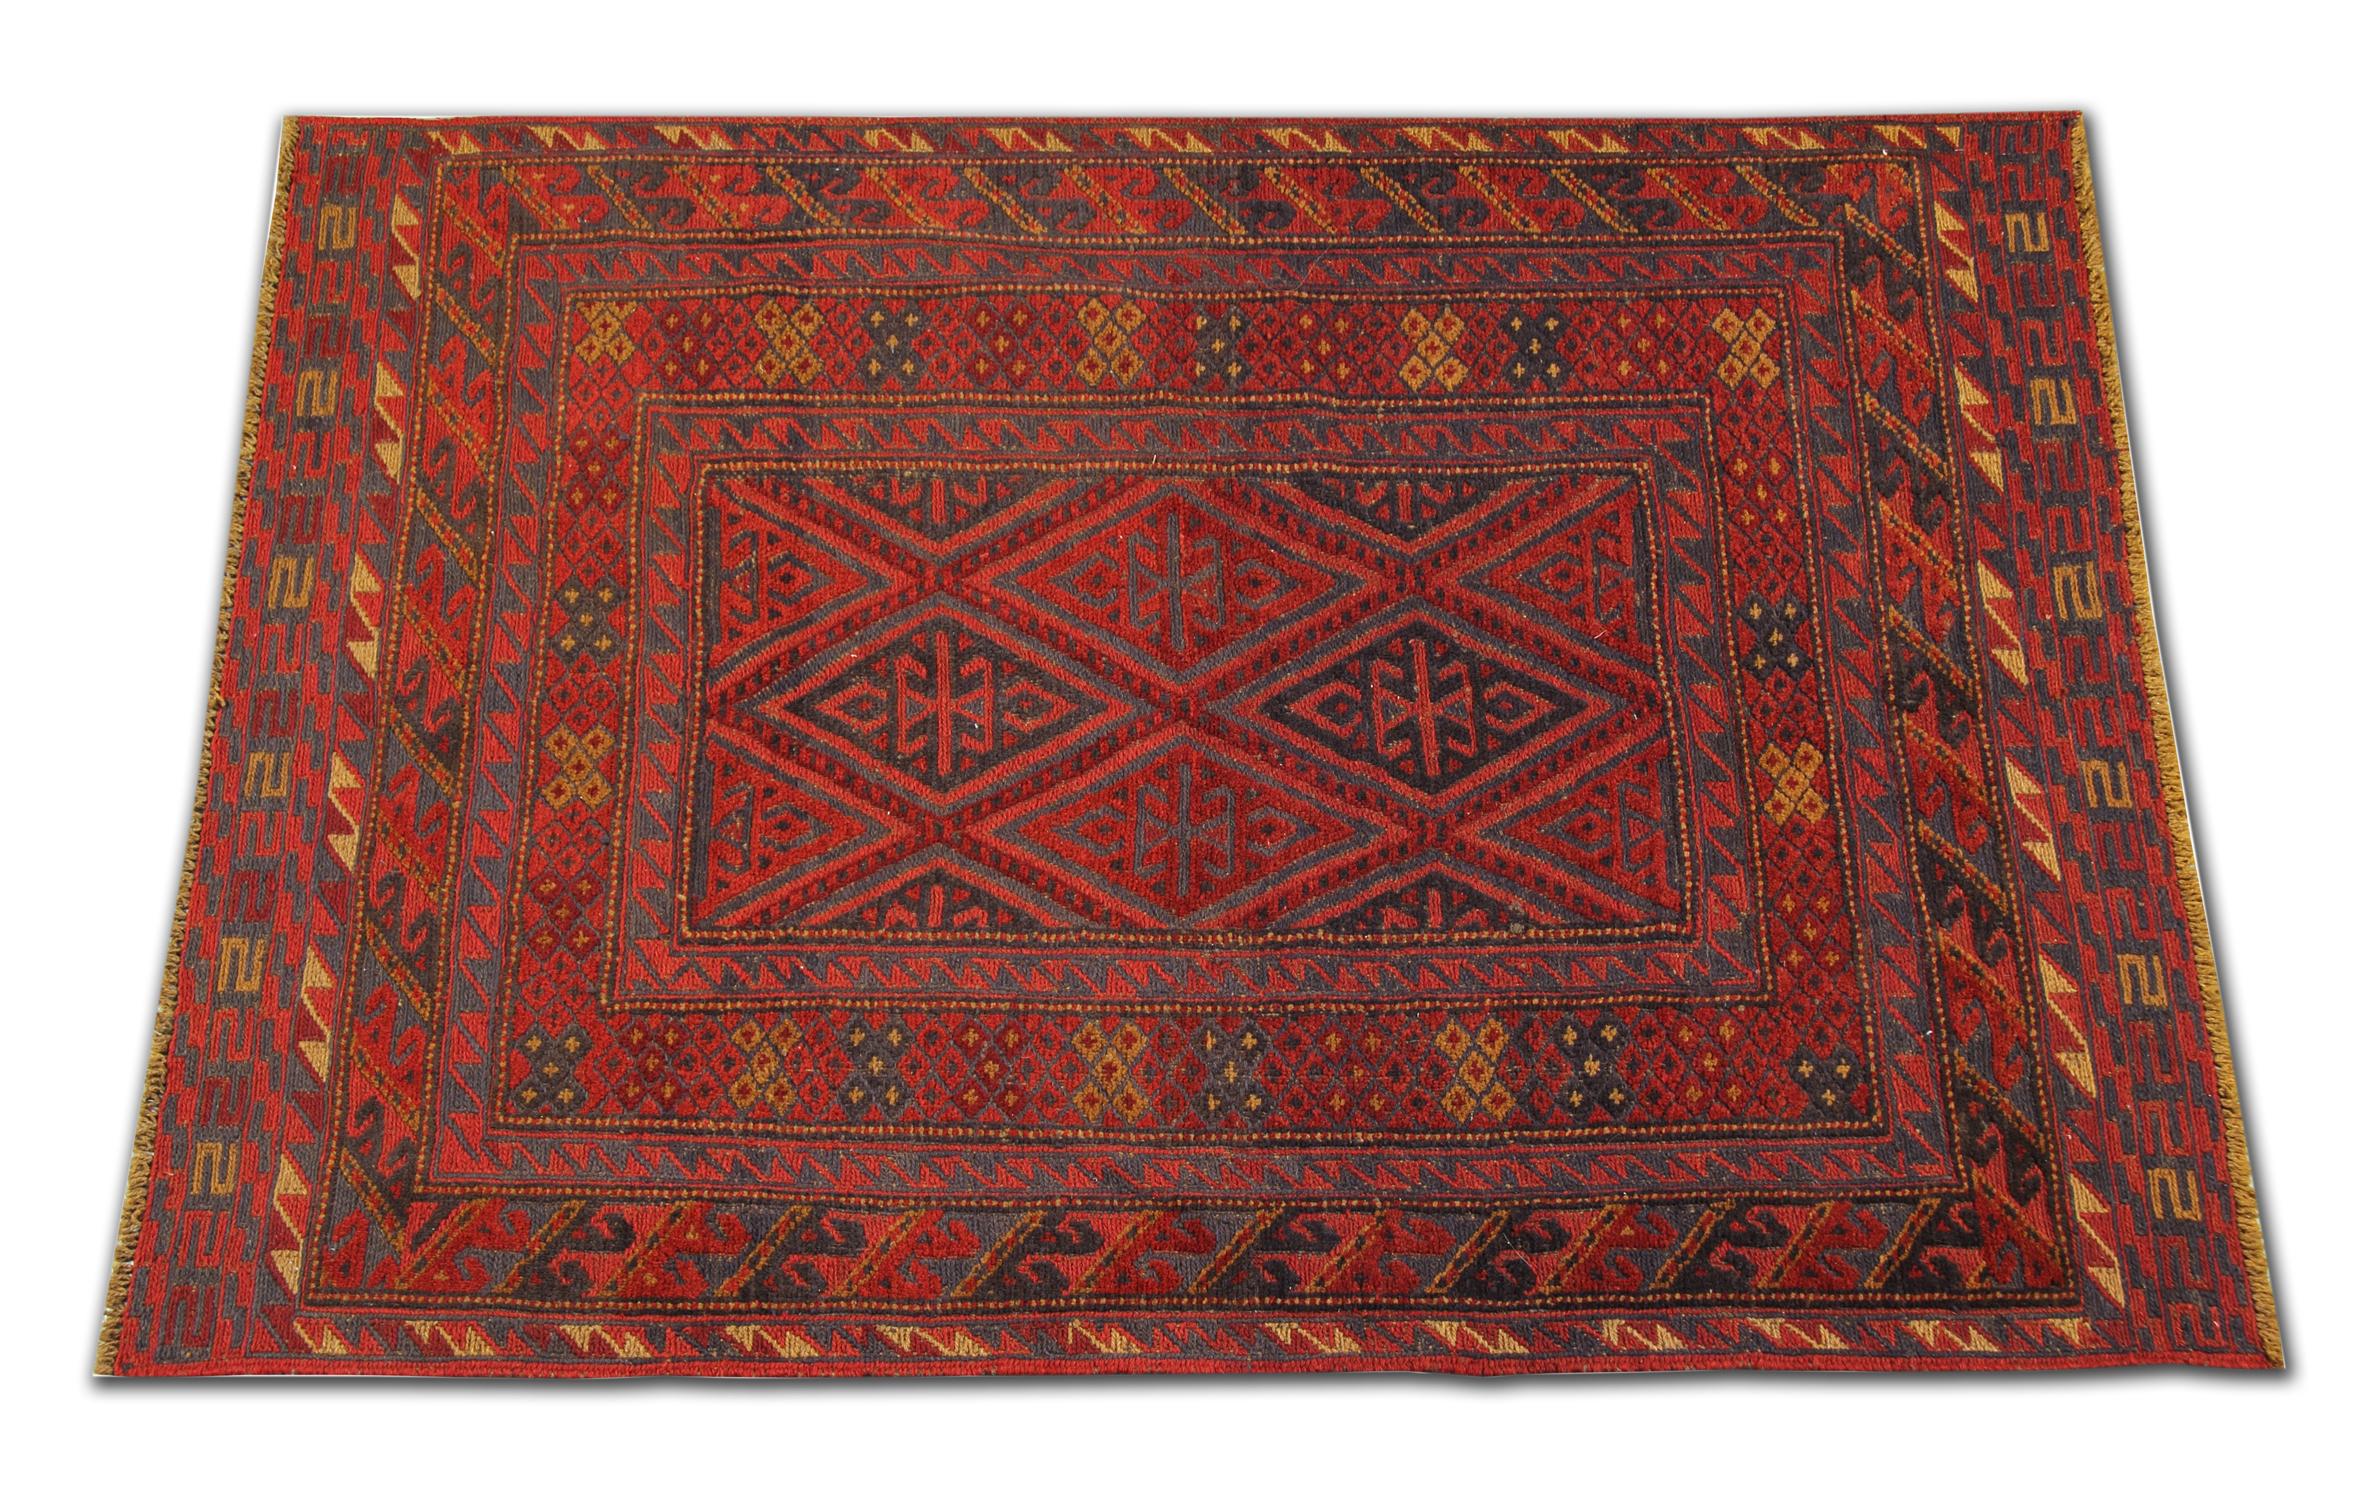 This is an example of fine afghan red rug made by highly skilled Turkman handmade rugs weavers in the north of Afghanistan. They have used hand-spun wool and 100% organic dyes for the production of these wool rugs. This tribal rug has repeating